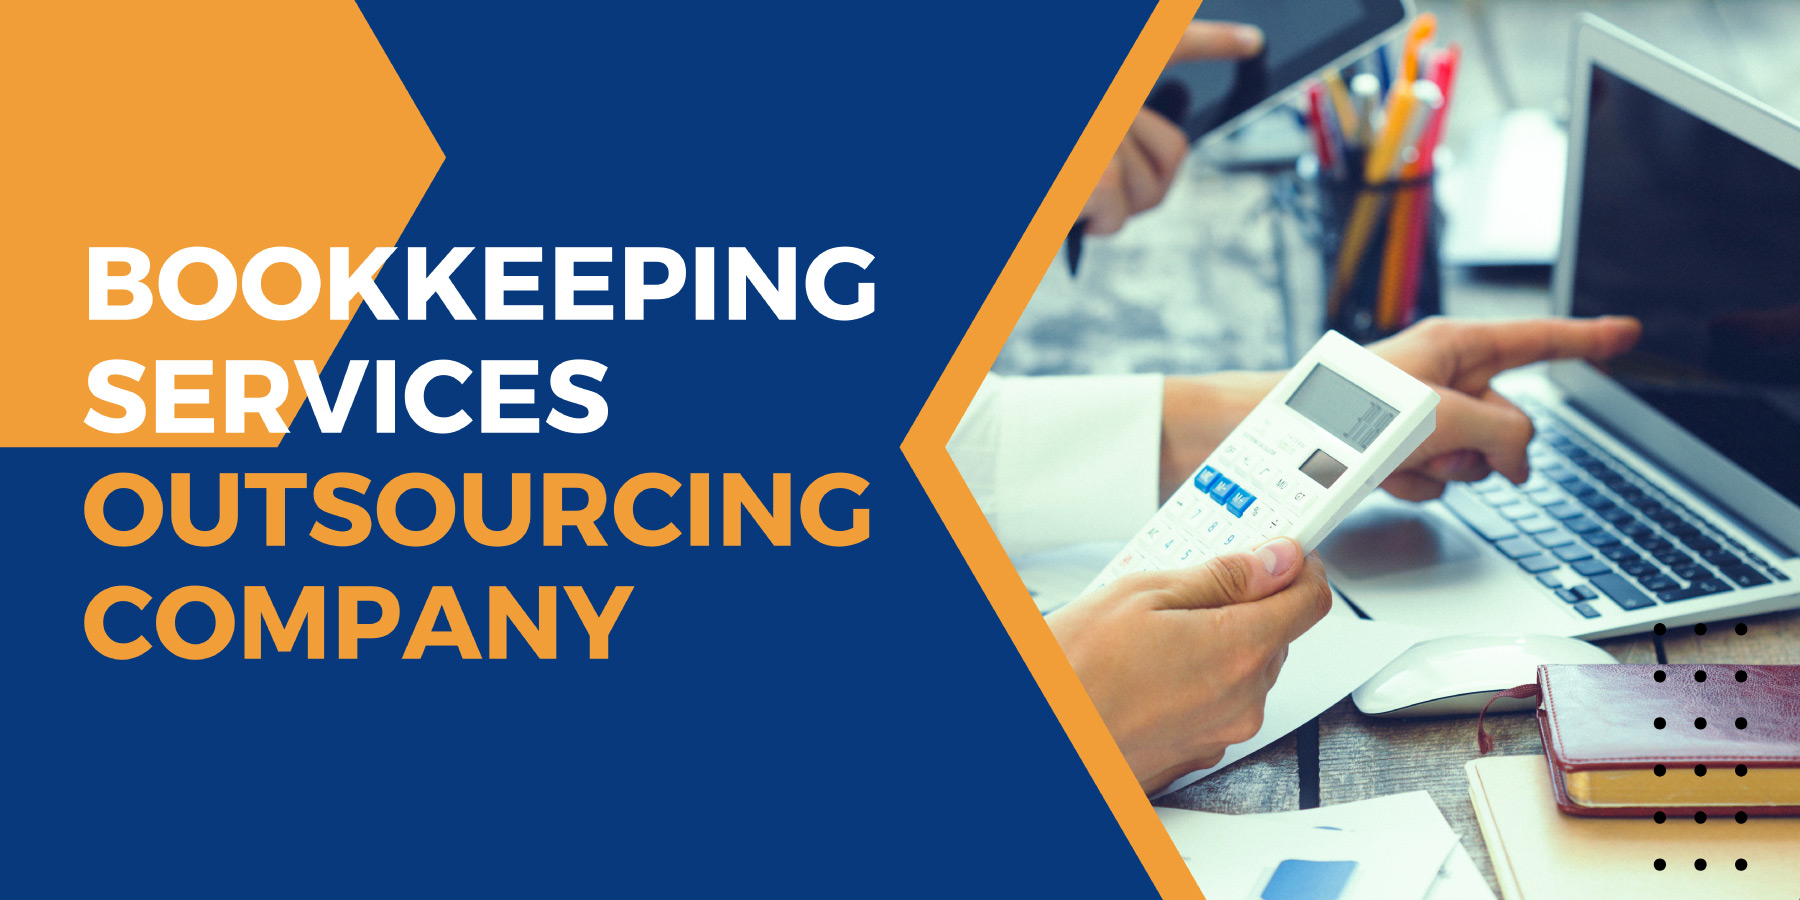 vserve | Scaling Your Business with Bookkeeping Services Outsourcing: A Growth Strategy